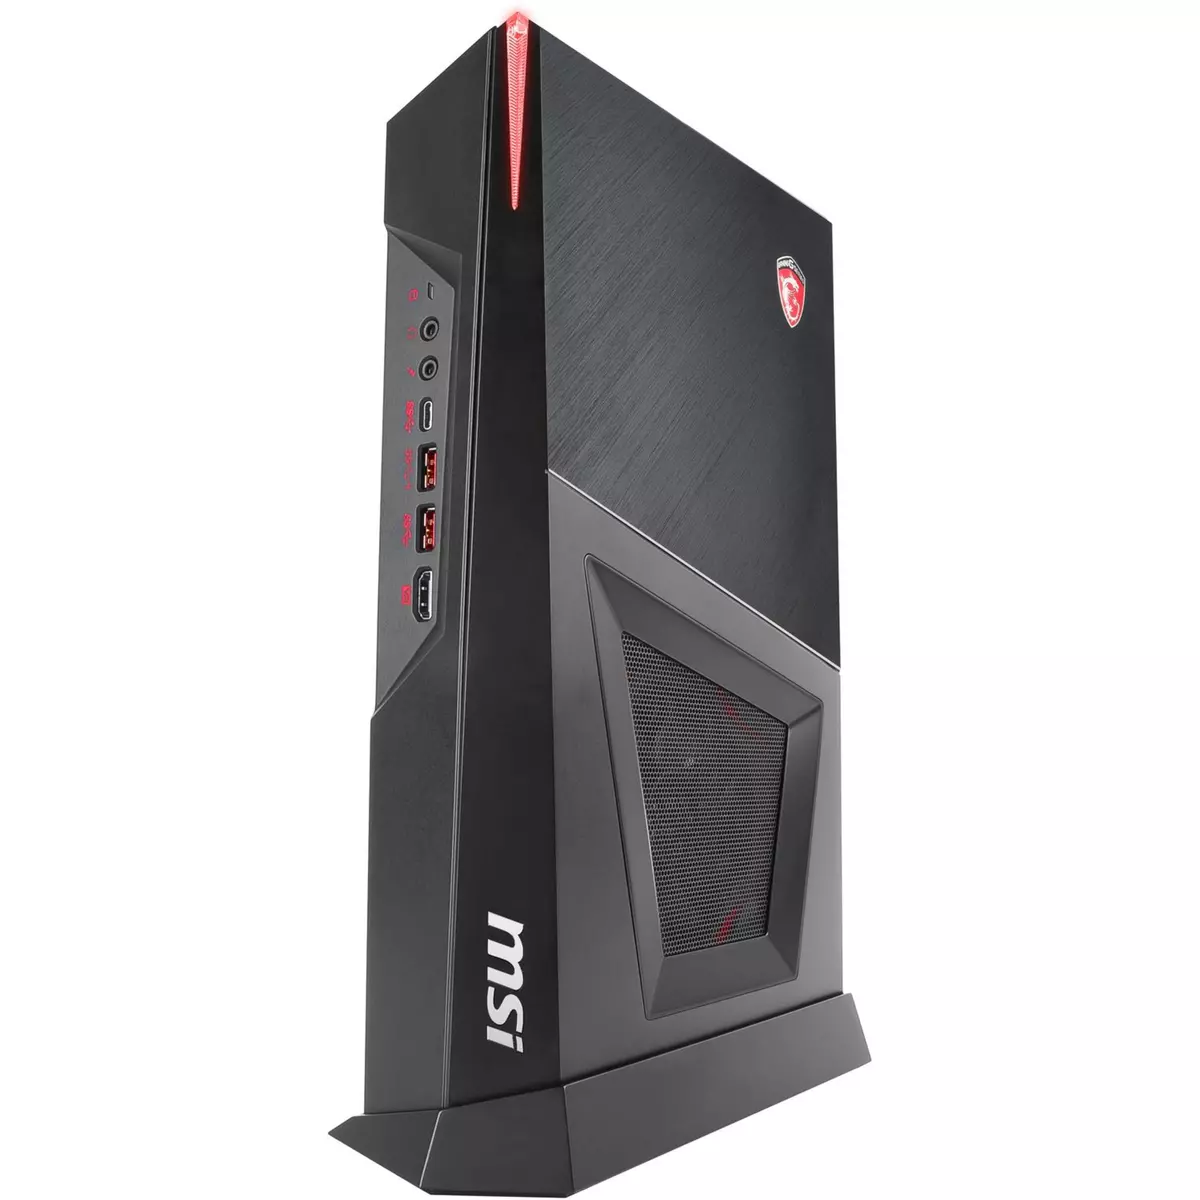 MSI Unité centrale Gaming Trident 3 8RA-400FR